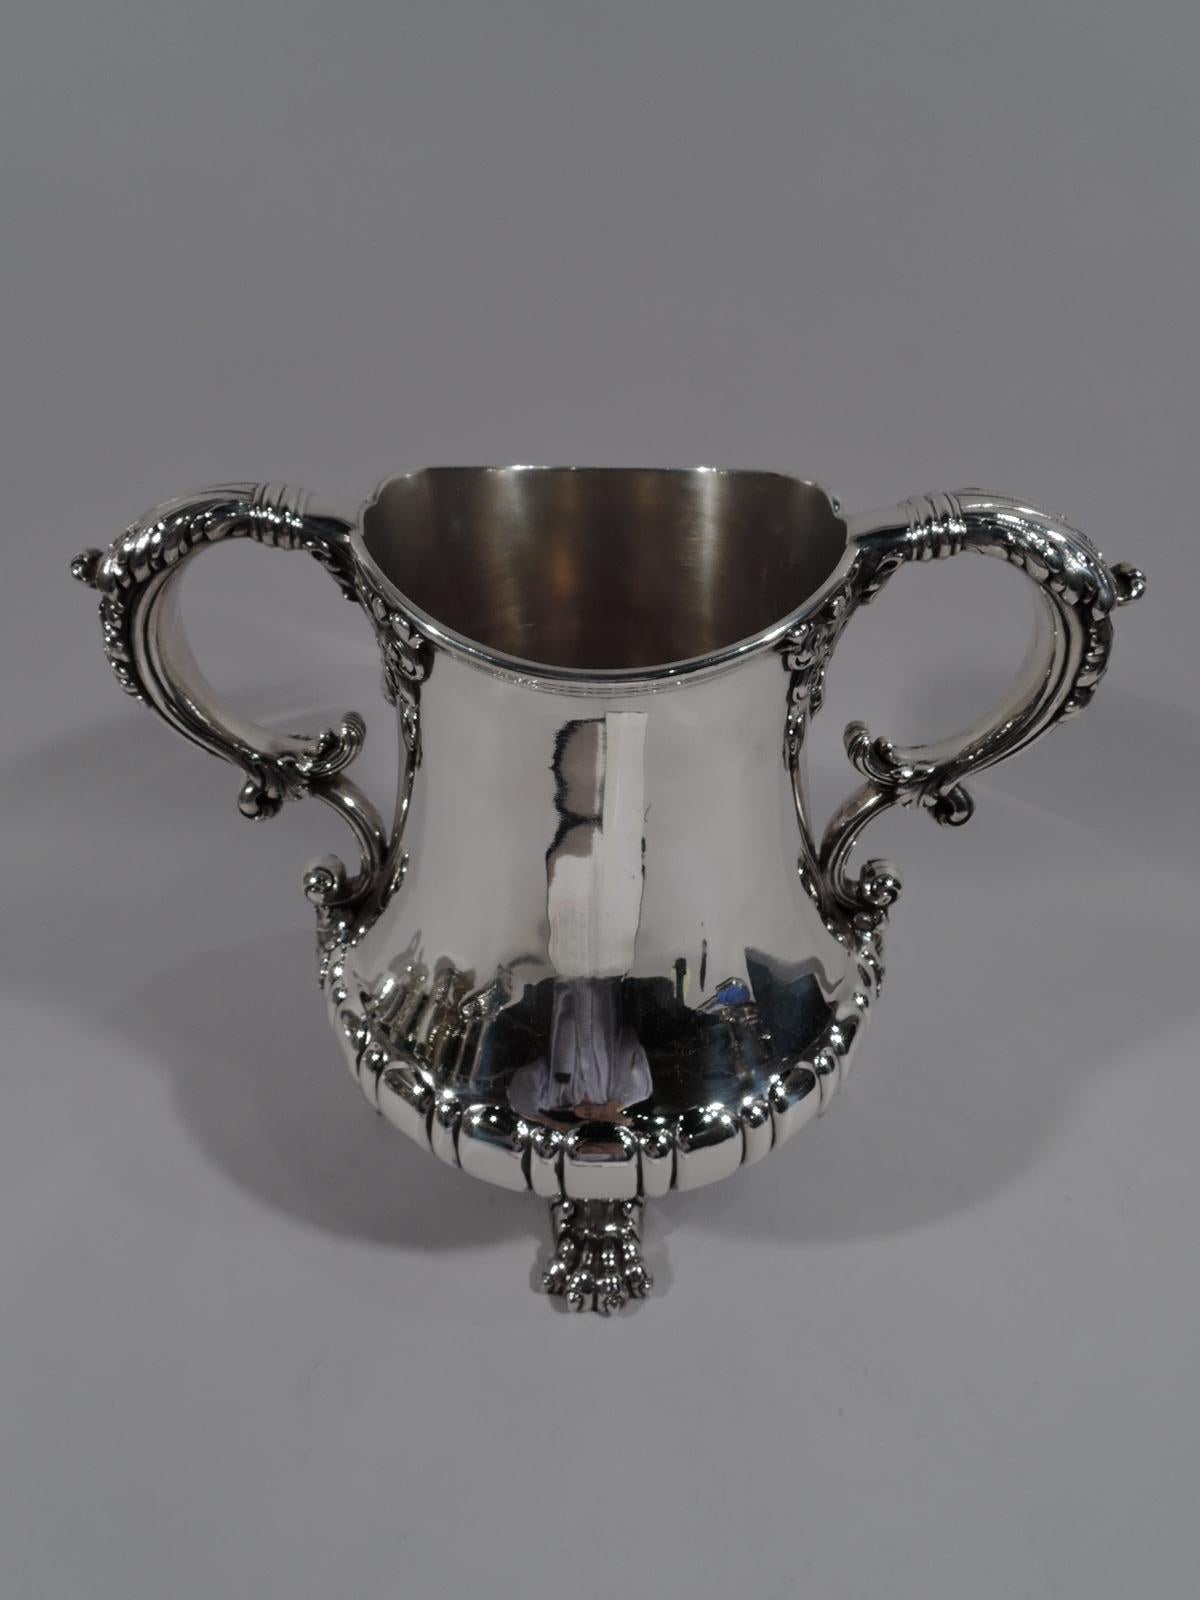 Turn-of-the-century classical sterling silver trophy cup. Made by Whiting in New York. Bellied urn with bold stylized egg-and-dart border on foot ring with four leaf-mounted majorly big paws. Leaf-capped and mounted S-scroll side handles. Beautiful